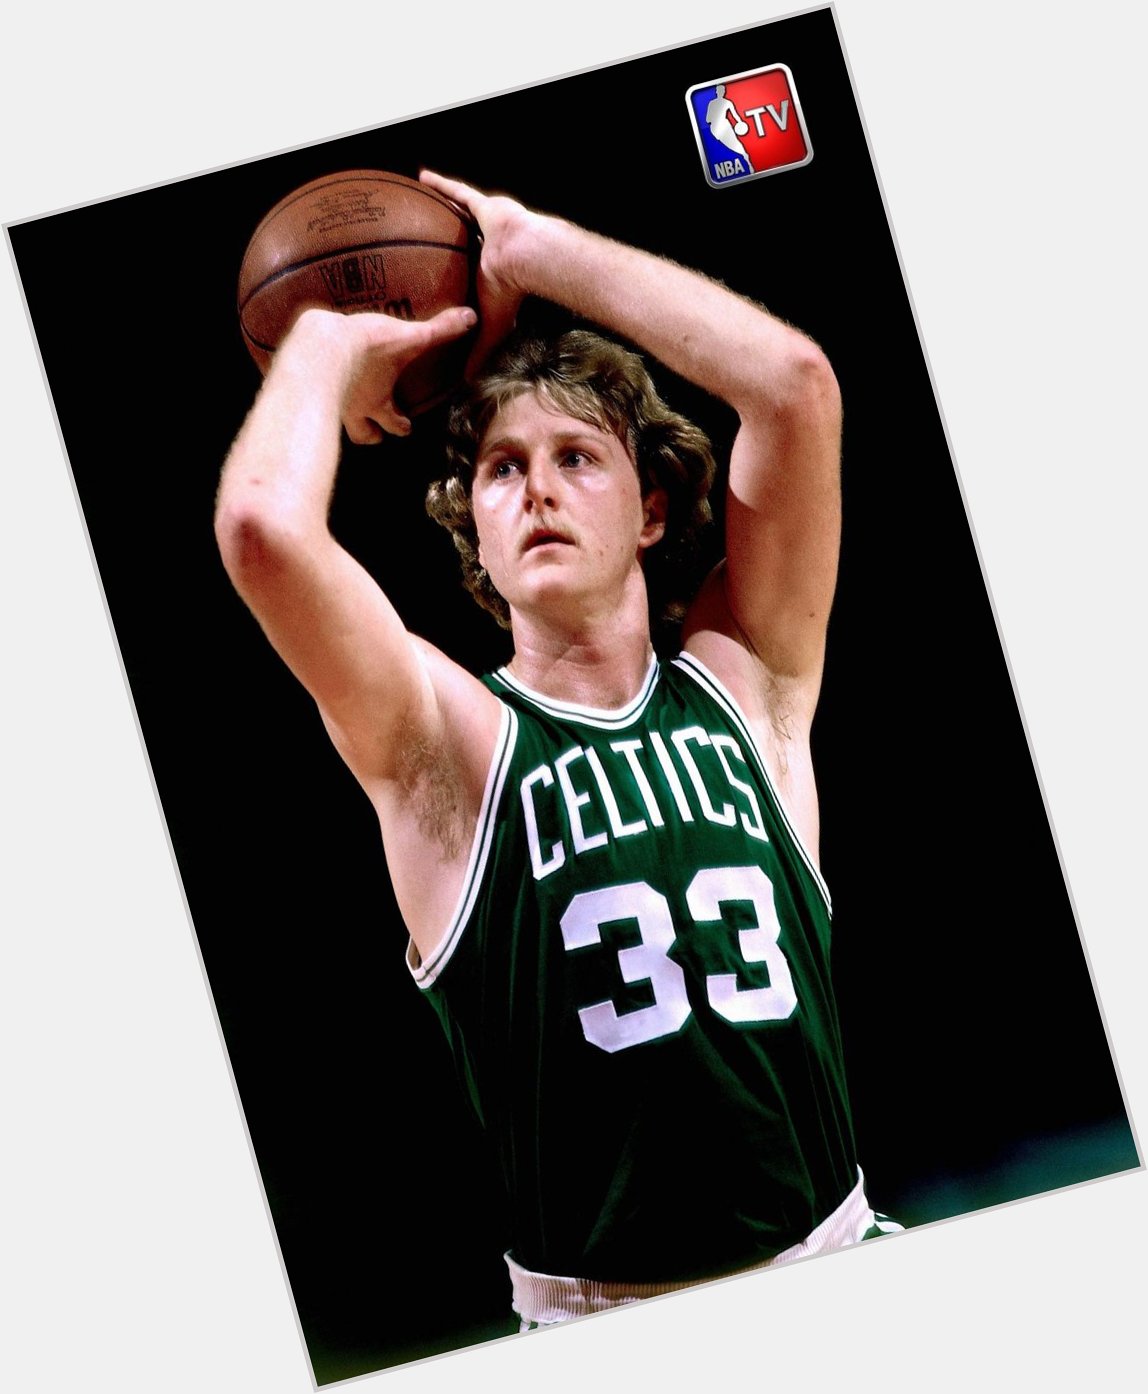 At we would like to wish a  Happy 61st Birthday to The Legend Larry Bird. 